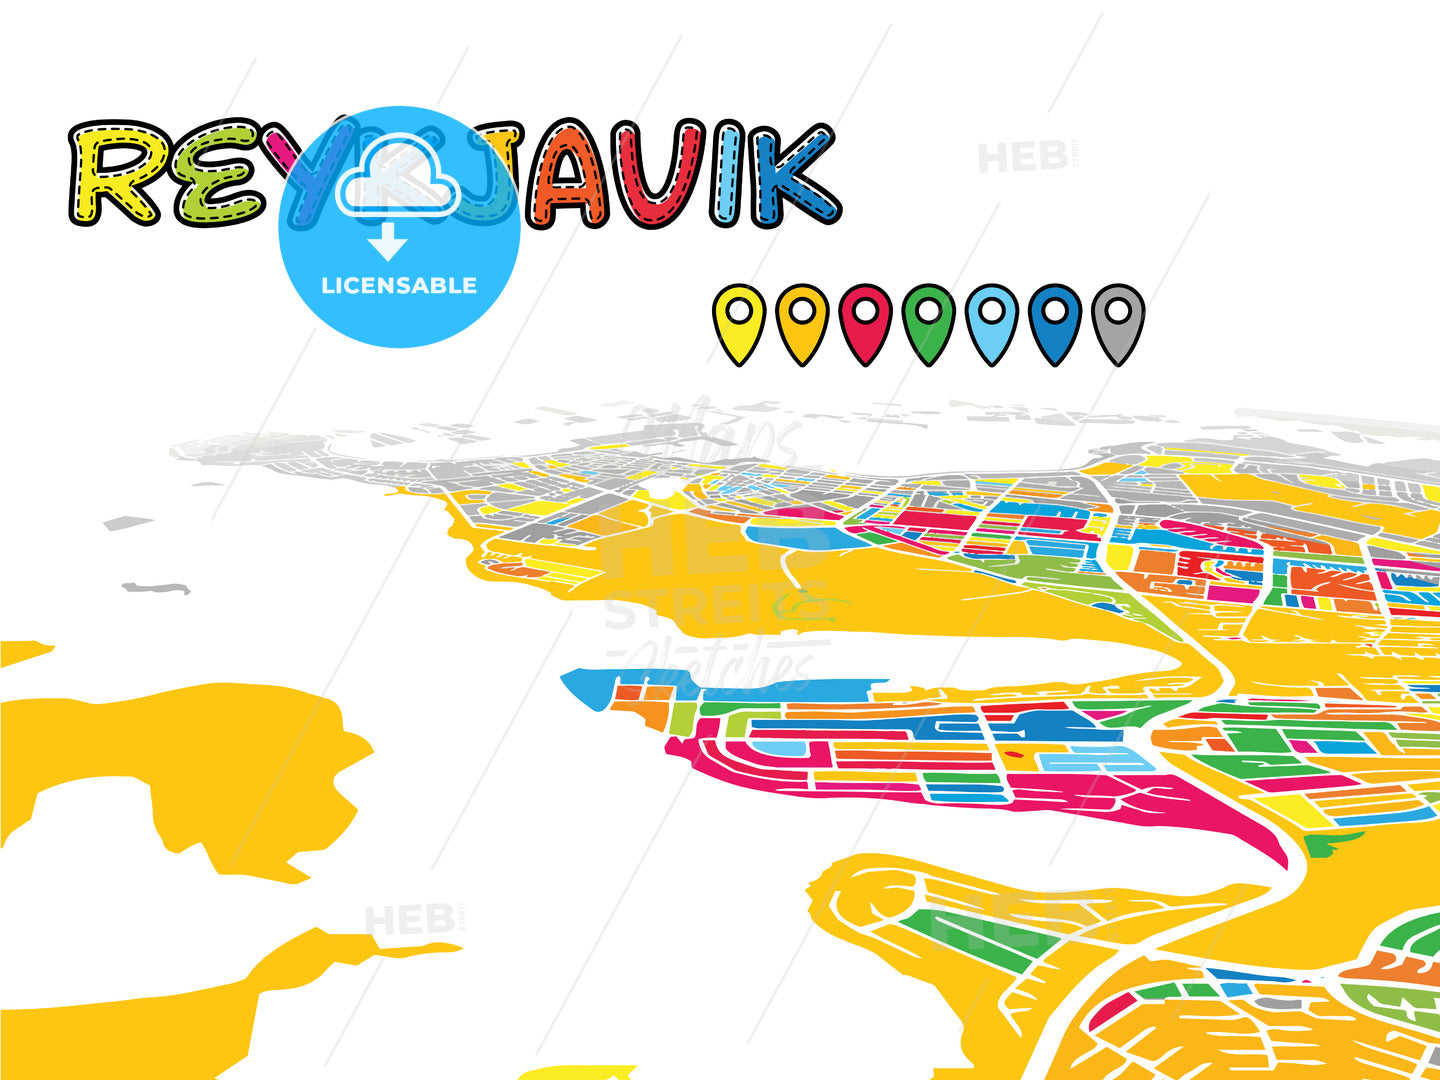 Reykjavik, Iceland, downtown map in perspective